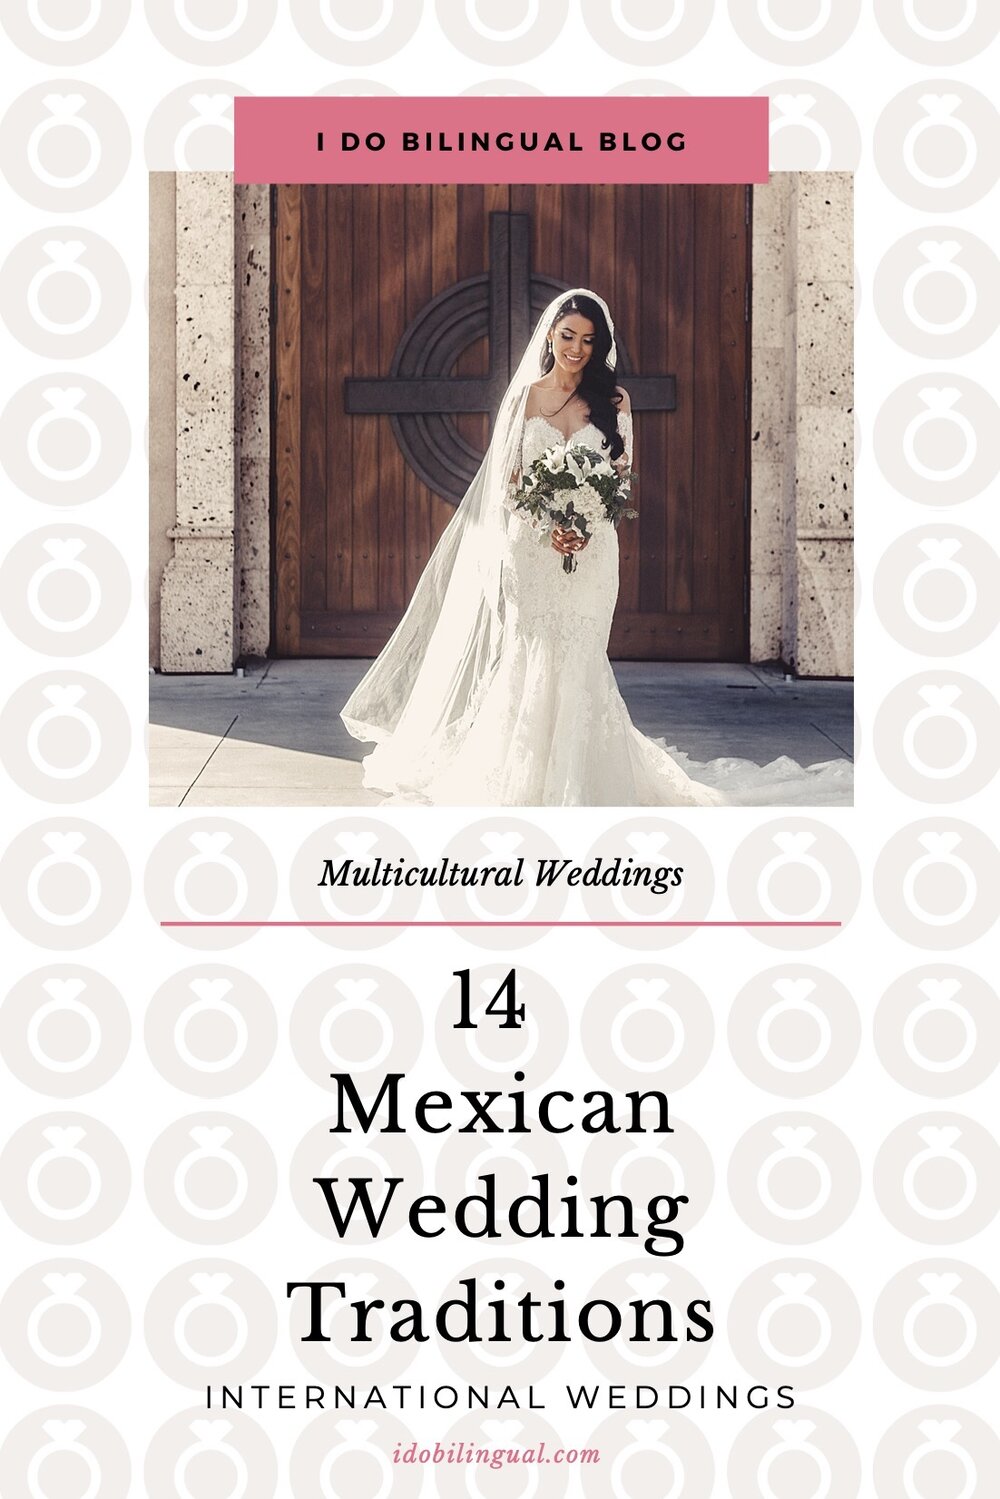 Who pays for the wedding in spanish culture?